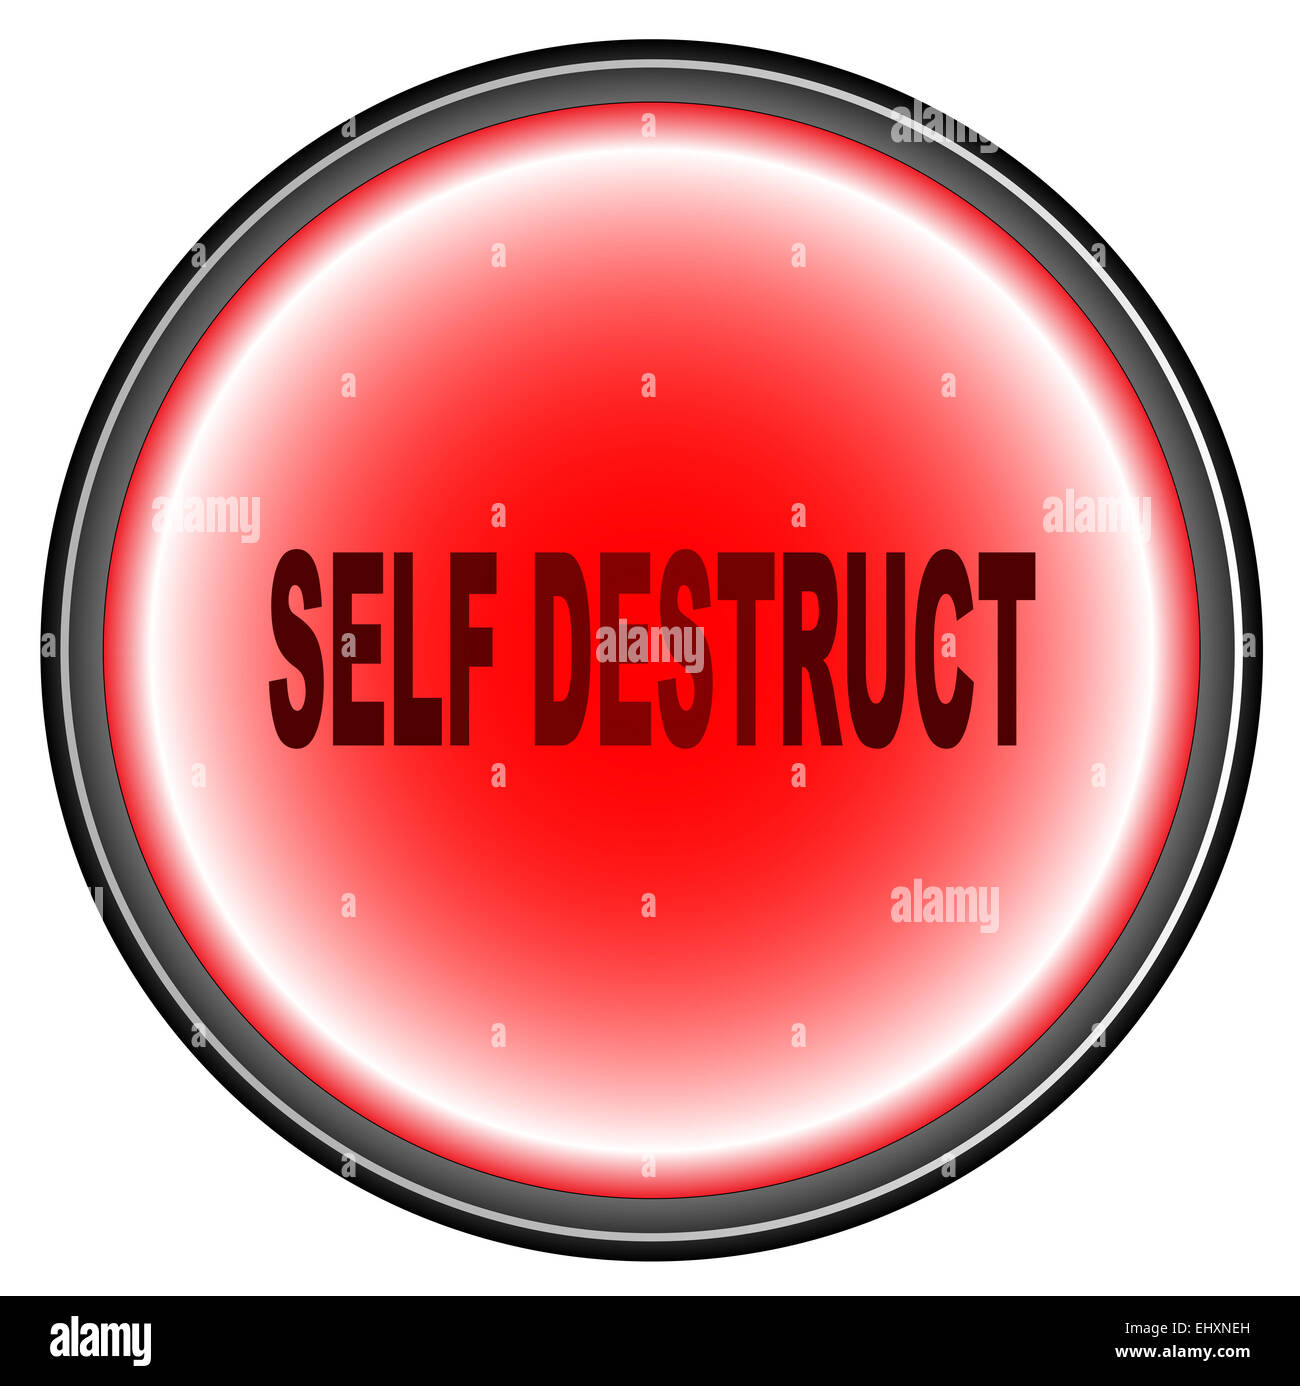 A Self Destruct Button button in red over a white background Stock Photo